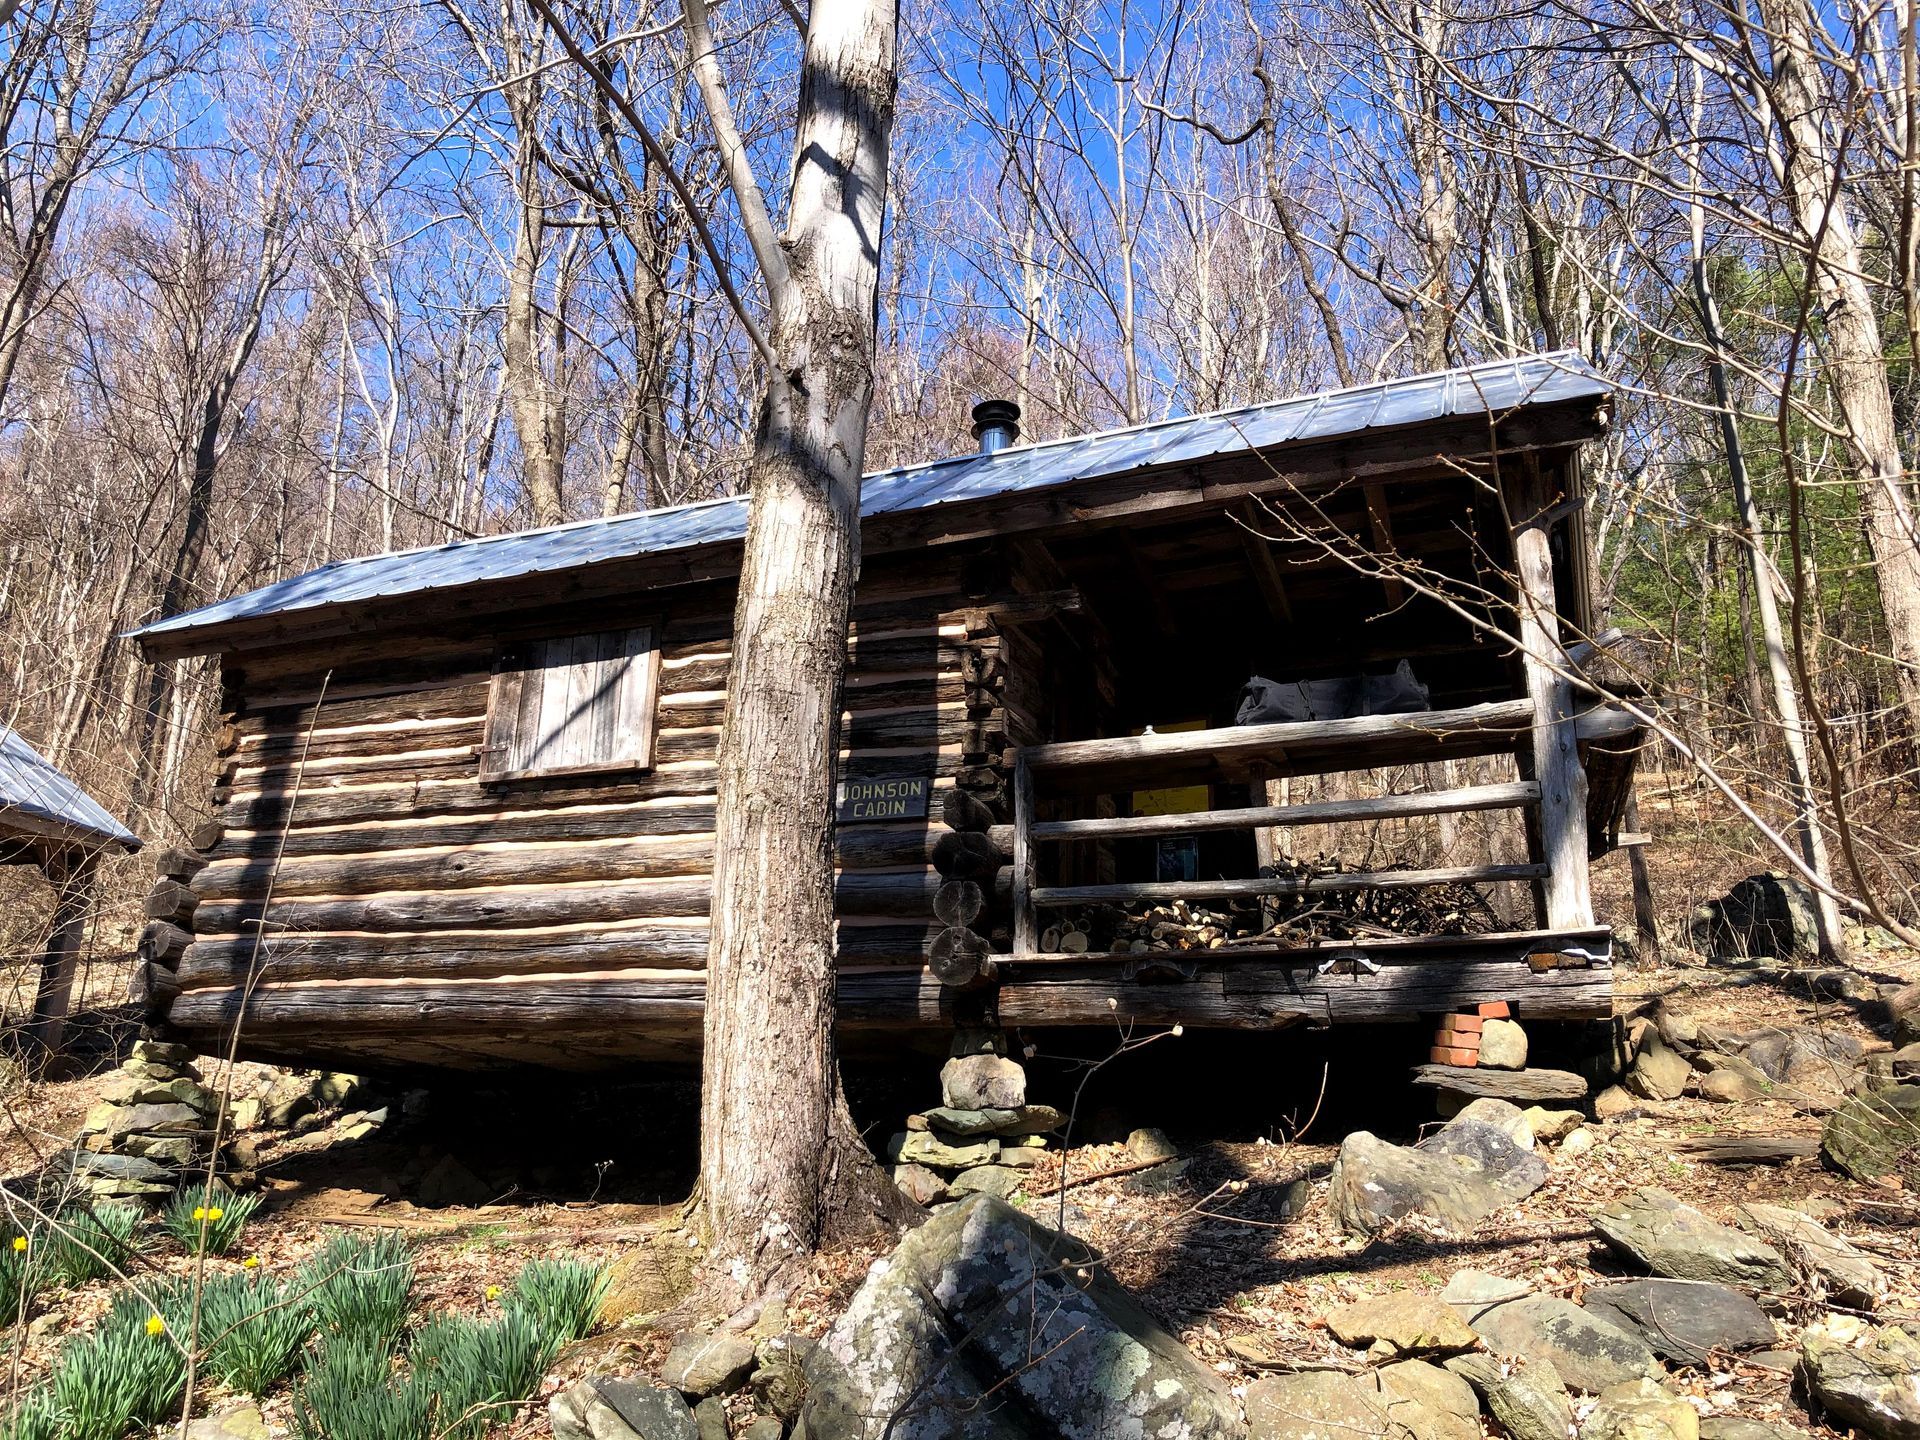 The side view of the Johnson cabin shows a small porch, with surrounding rocks and trees in the area.